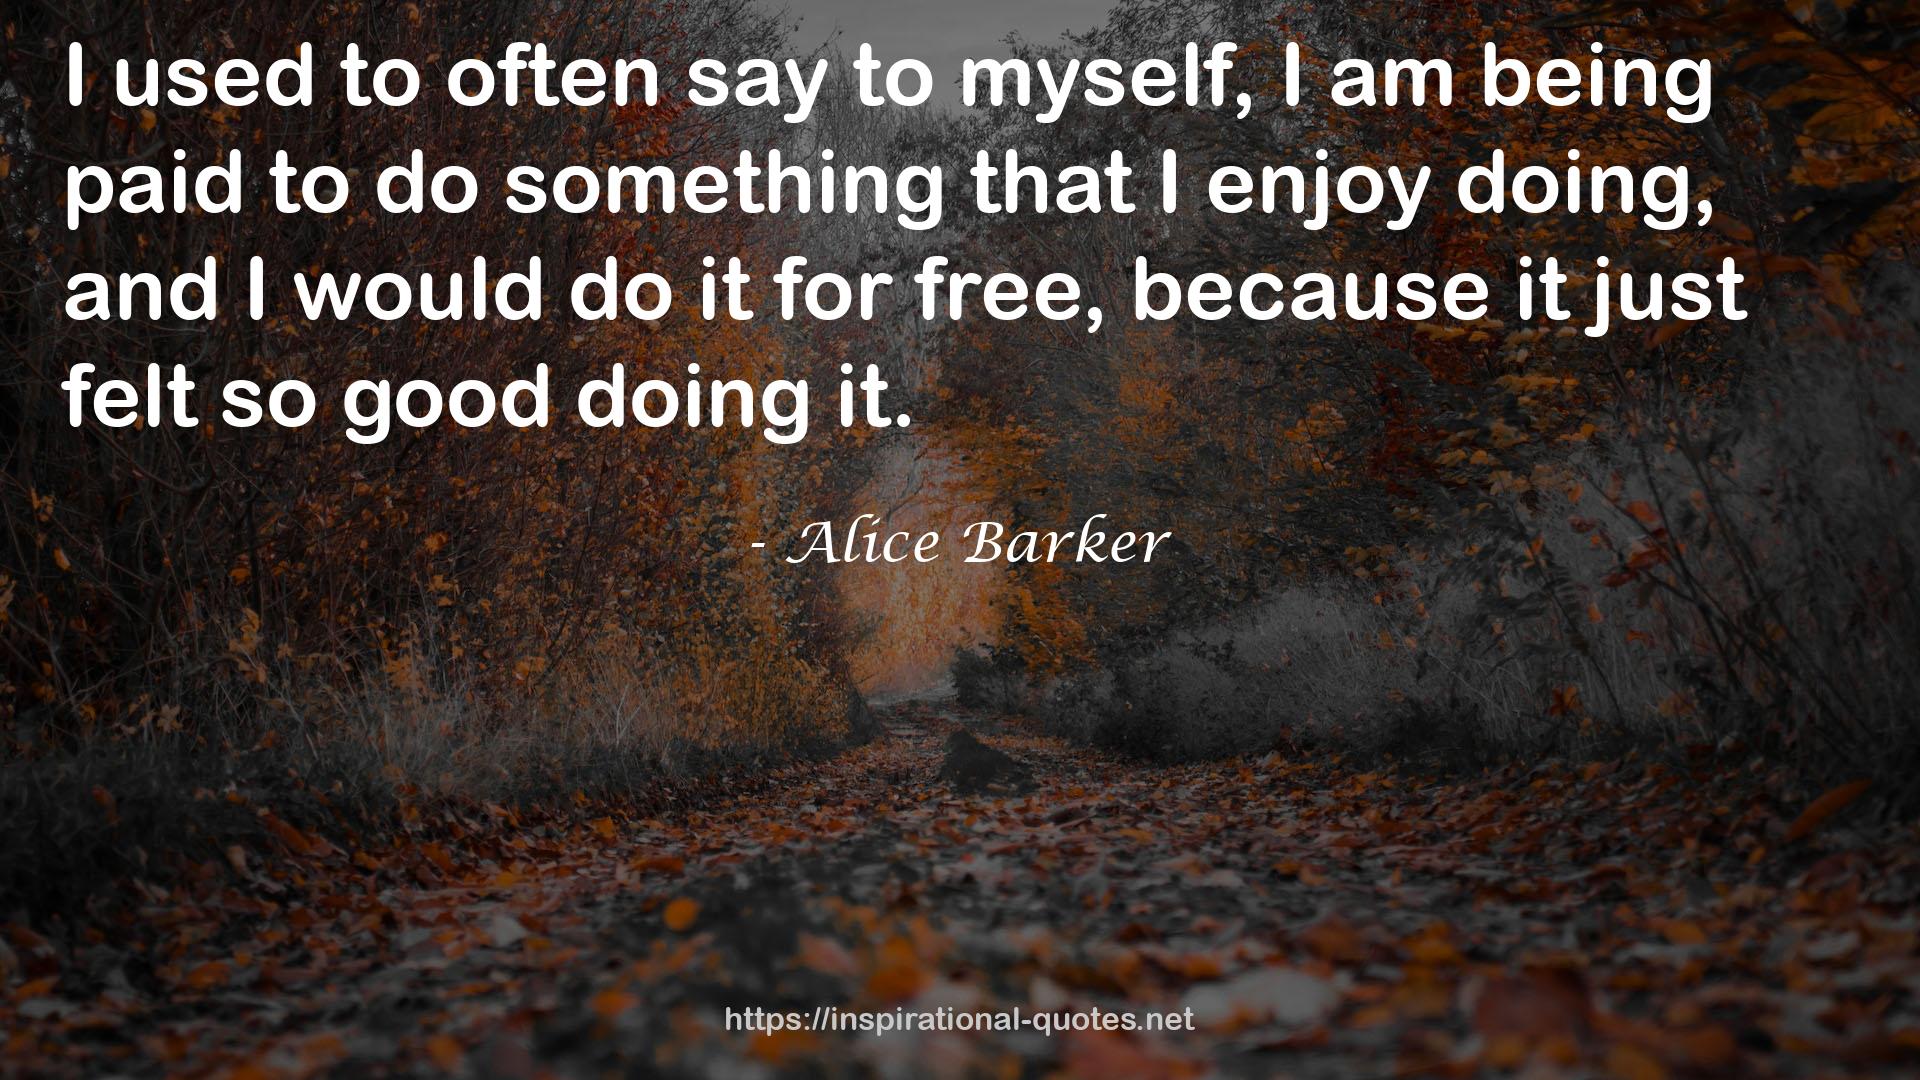 Alice Barker QUOTES